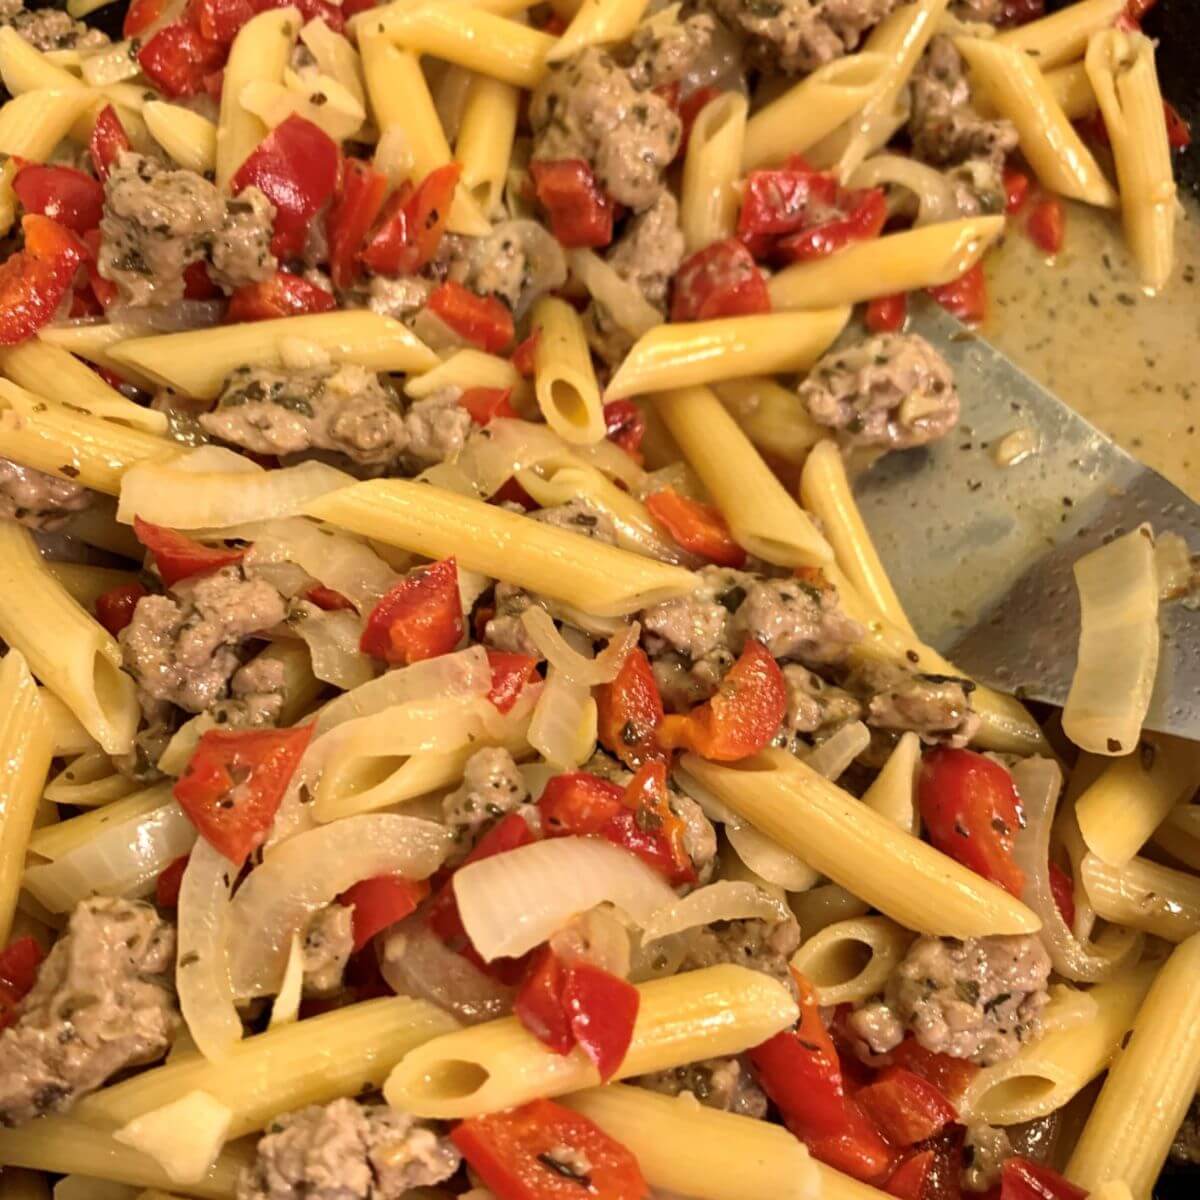 Penne pasta with ground pork, red peppers, and onion in a light sauce.